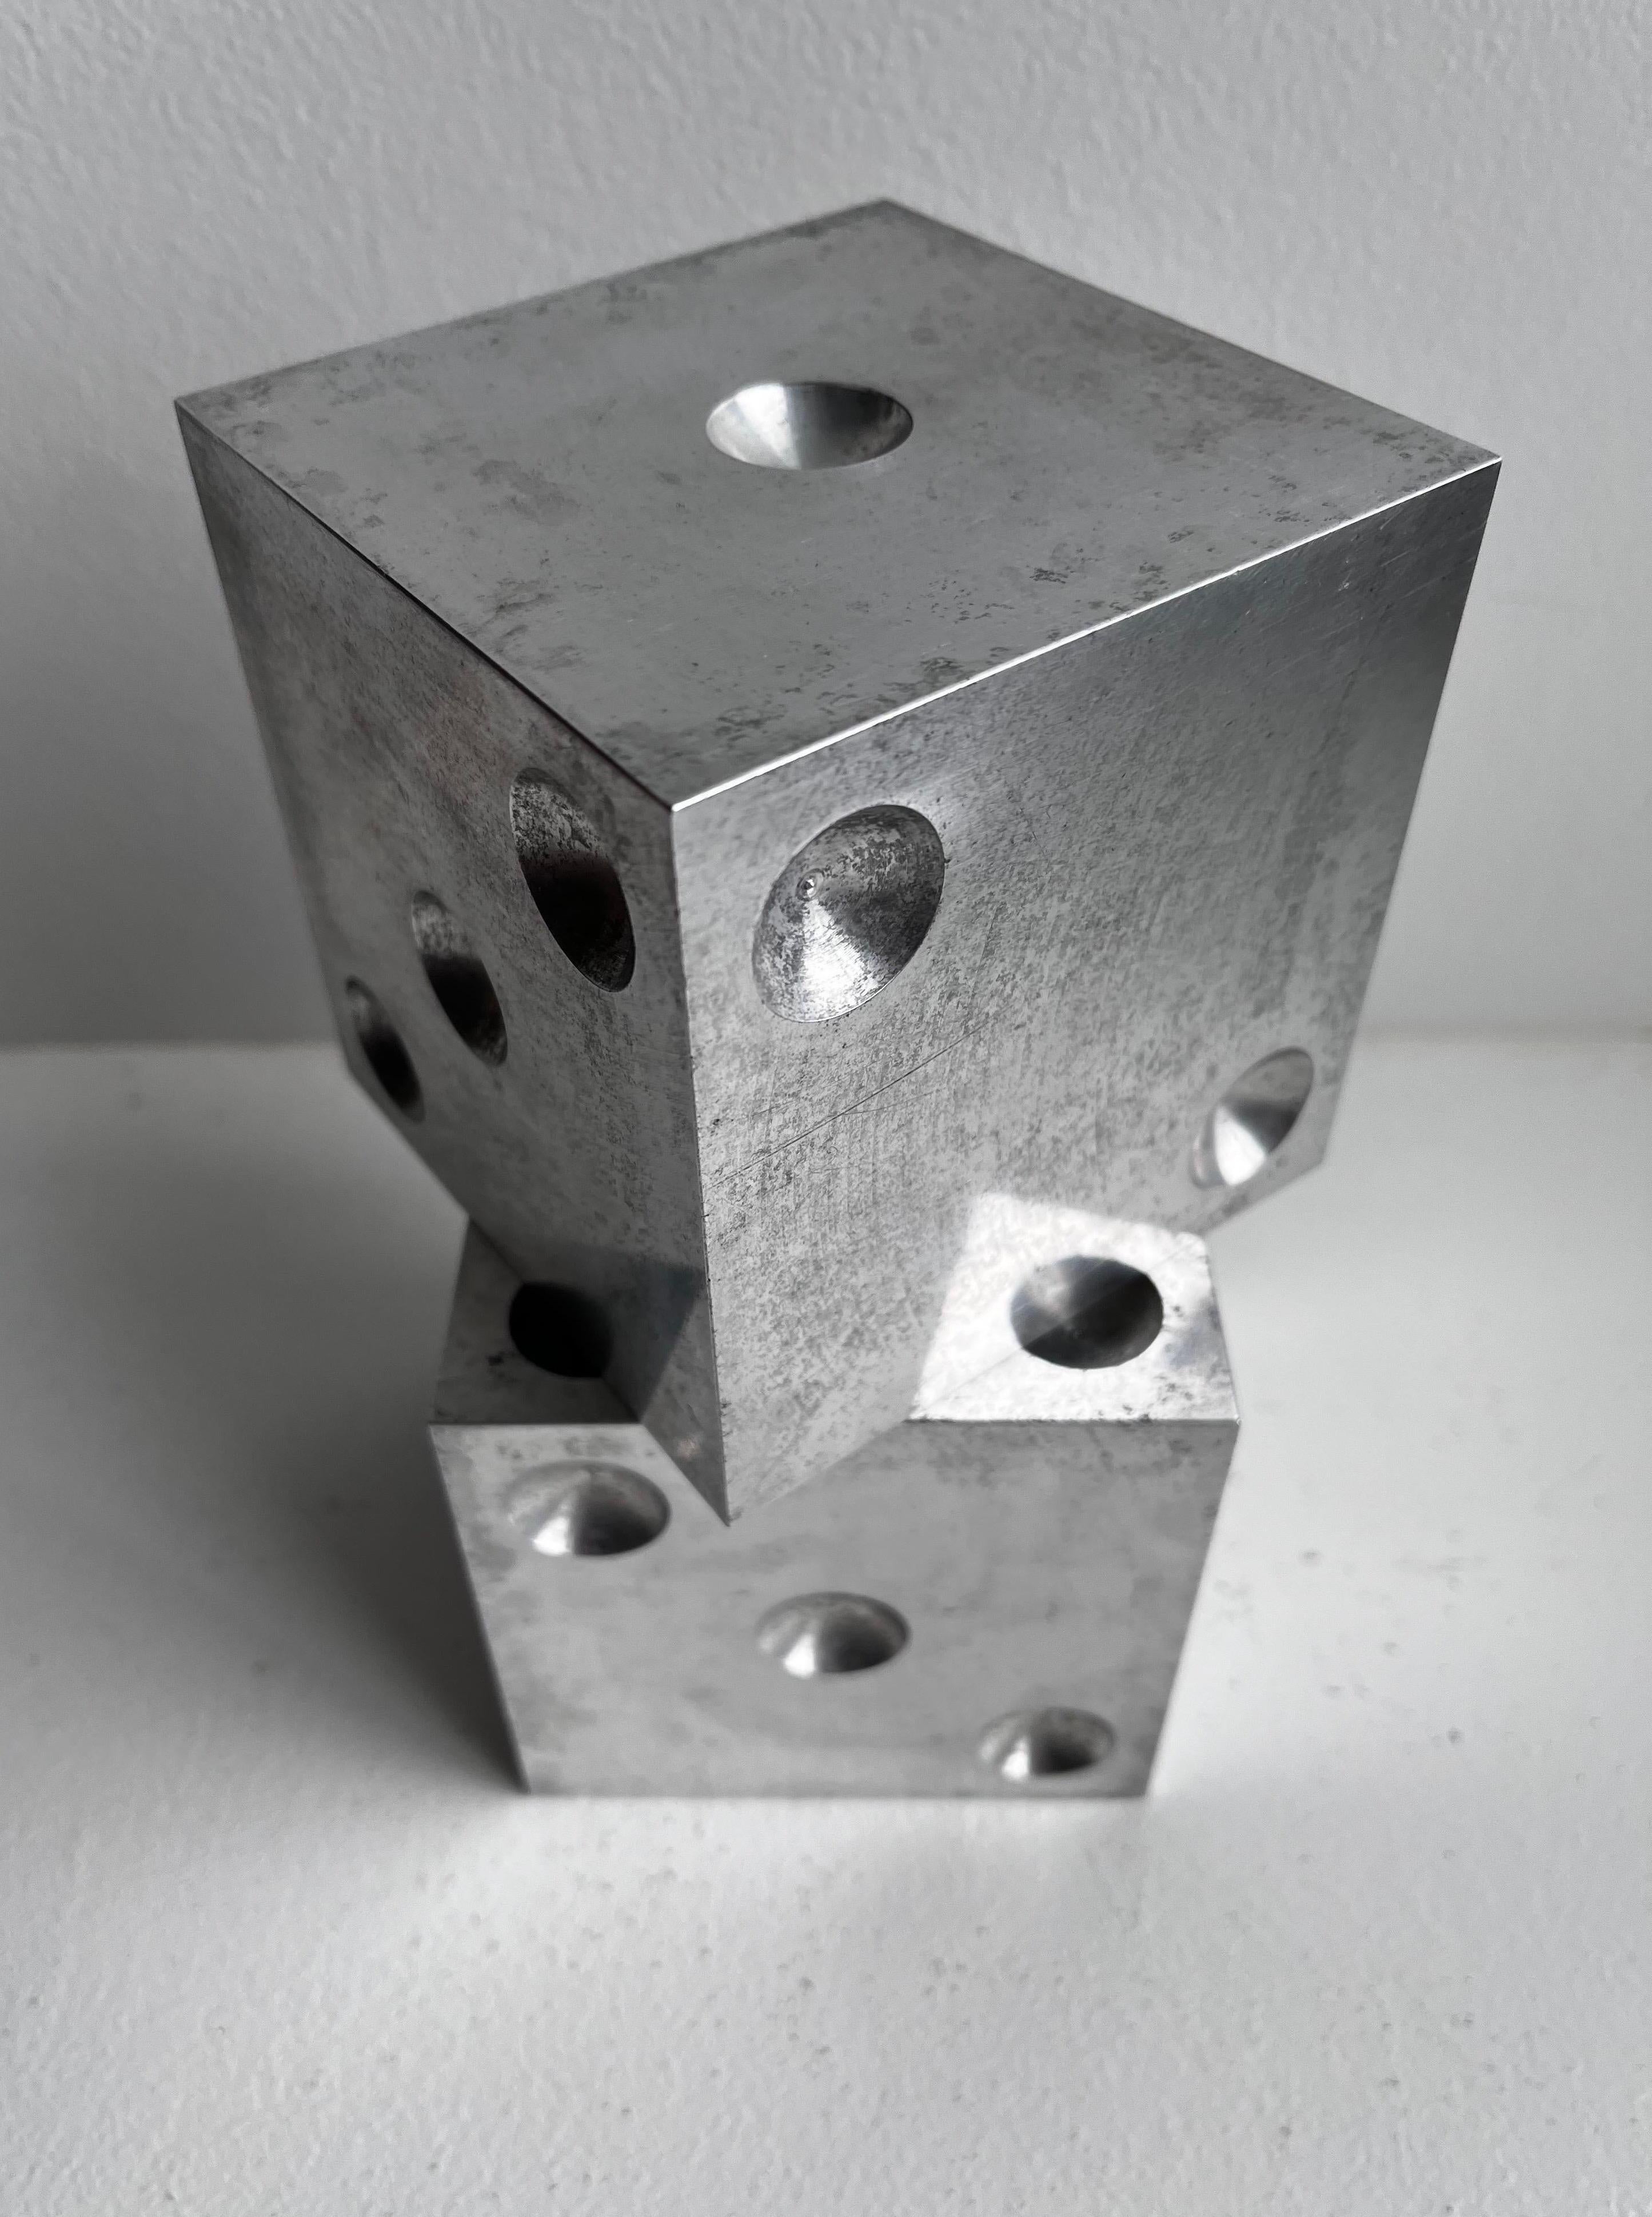 Large Dice made from solid Aluminum

Use as Sculpture.
Use as Bookends.
Use as other, you decide.

Origin, maker and year made unknown which only makes it better.
Great patina with some discoloration, edge and corners are sharp.

